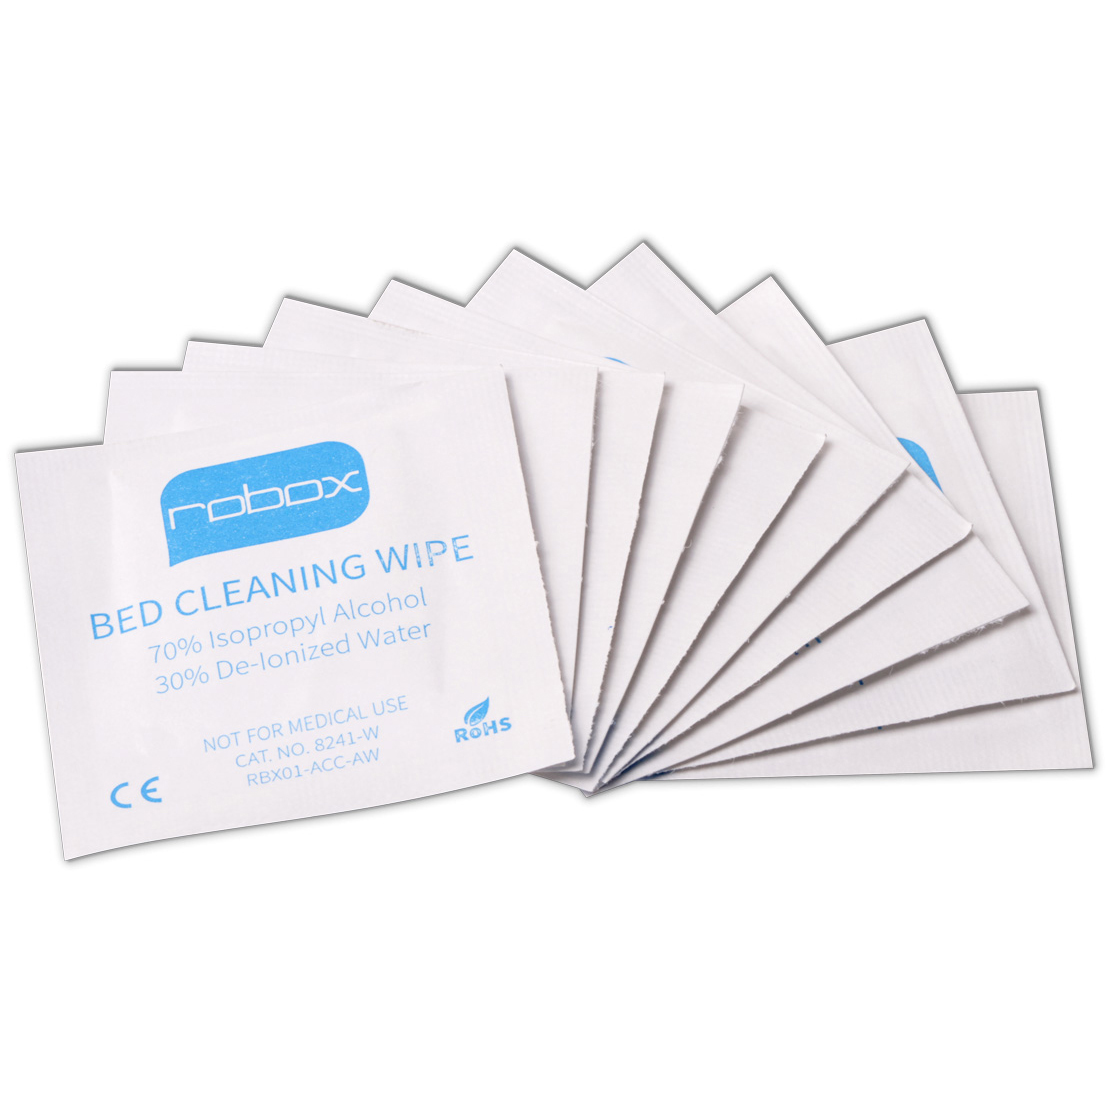 Original Robox RBX01-ACC-AW Pack of 10 Alcohol Wipes (RBX01-ACC-AW)